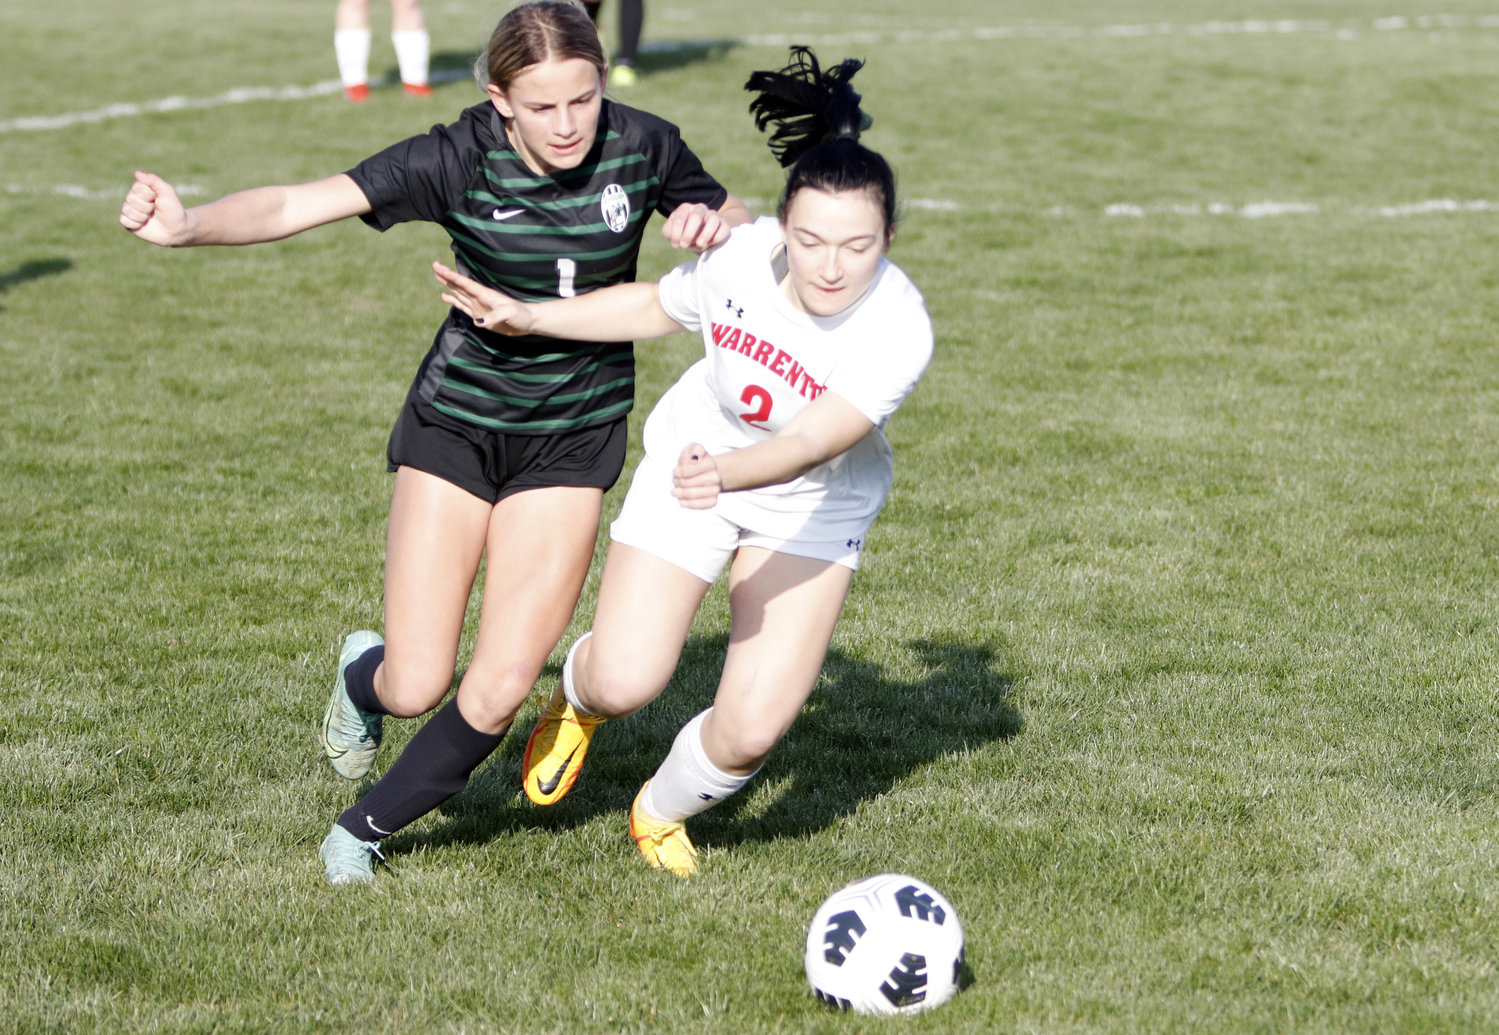 Warrenton junior Kylie Overkamp (right) battles for possession of the ball during Tuesday night’s game.